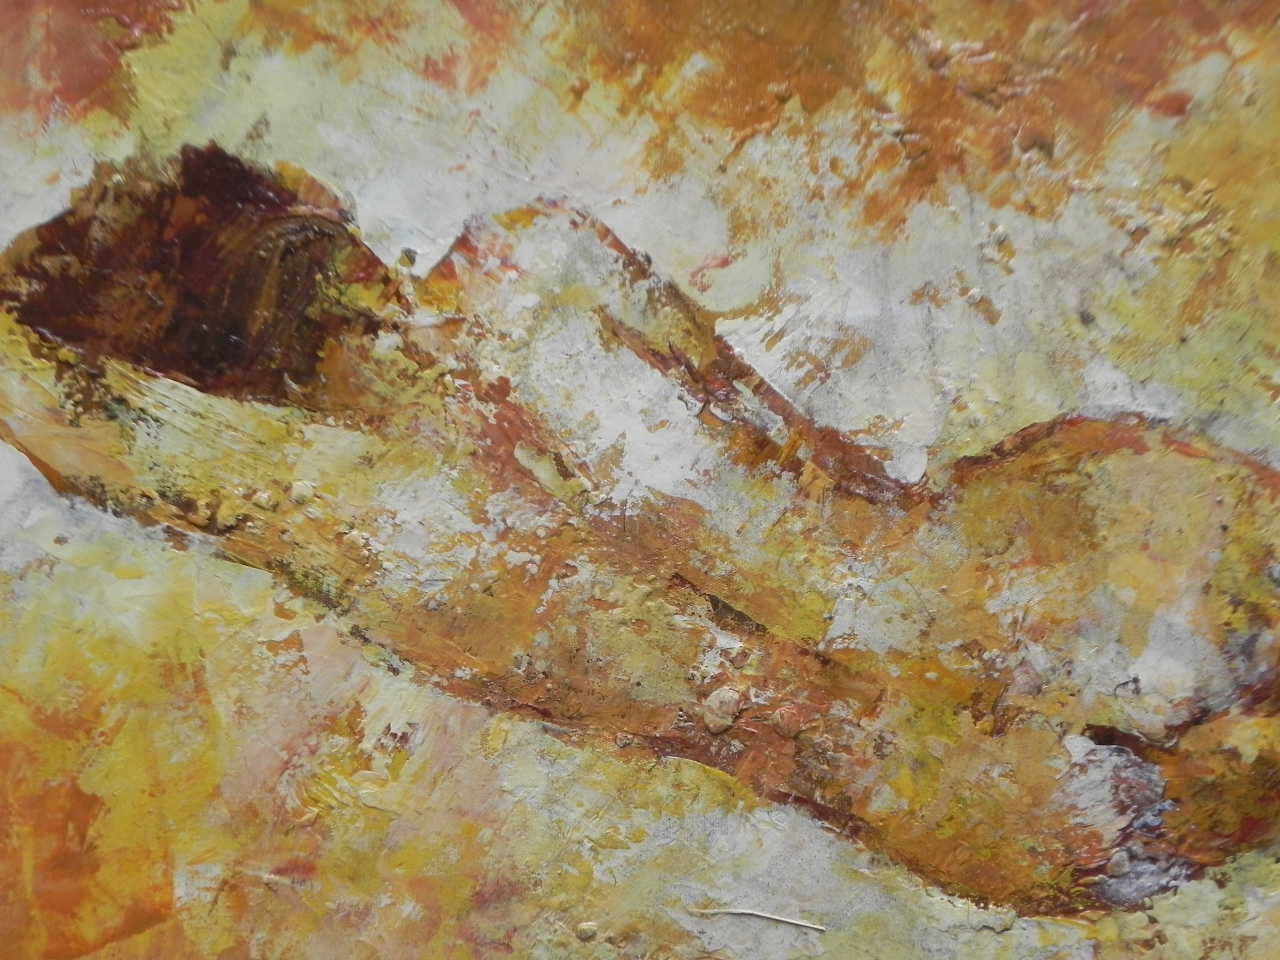 I Like Mike's Mid Century Modern Wall Decor & Art Nude Reclining in Yellows and Oranges, Oil on Canvas